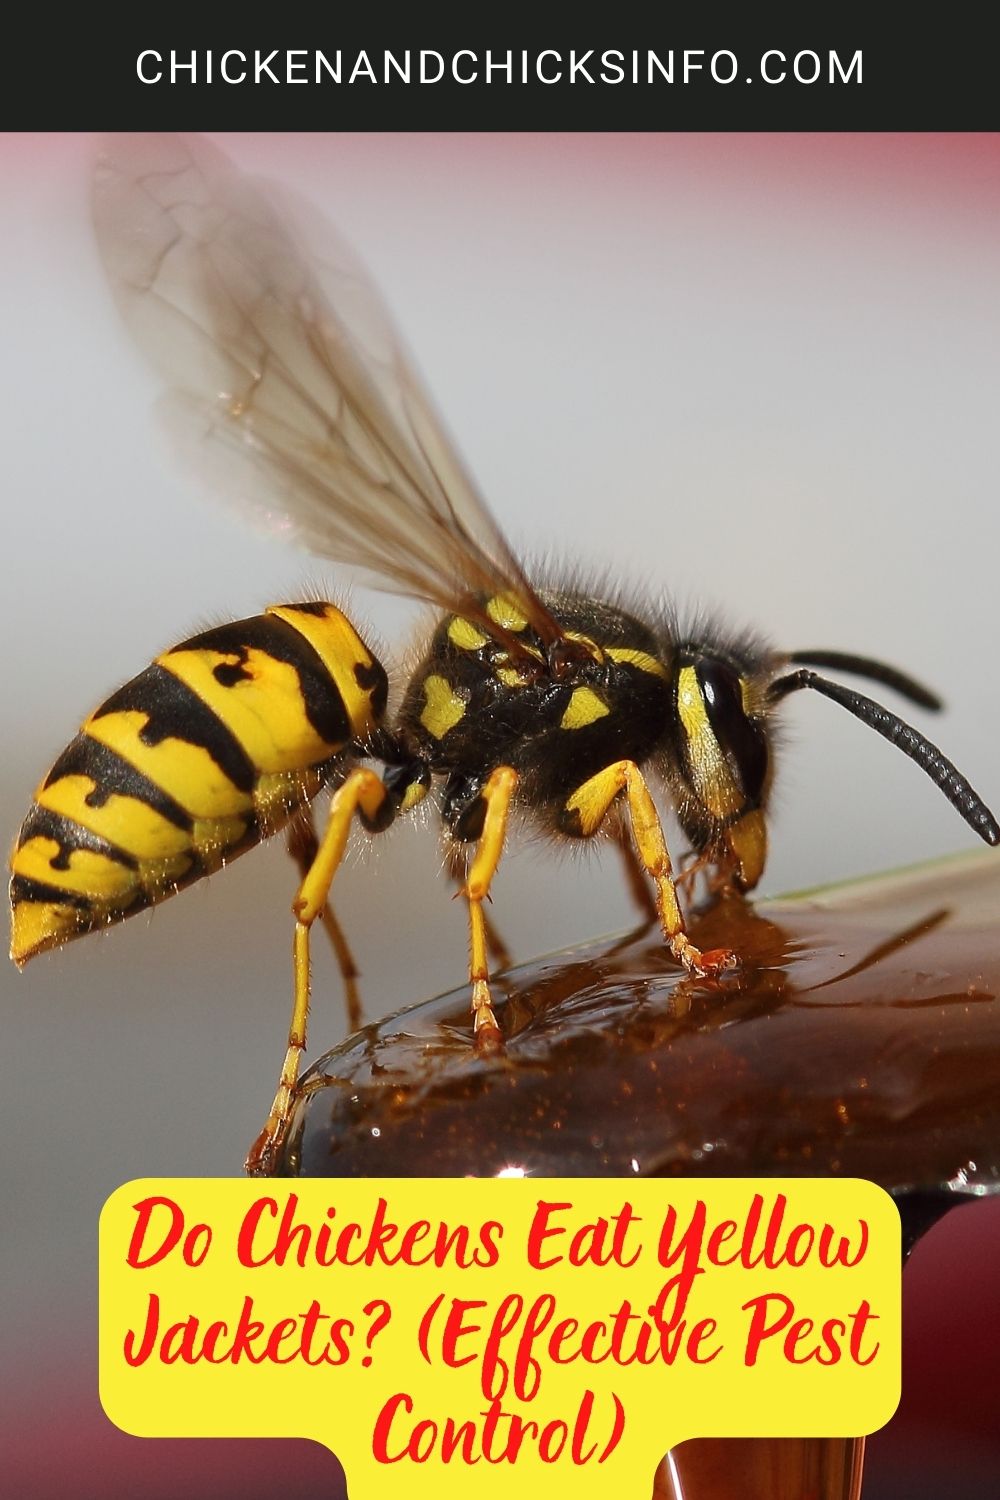 Do Chickens Eat Yellow Jackets? (Effective Pest Control) poster.
